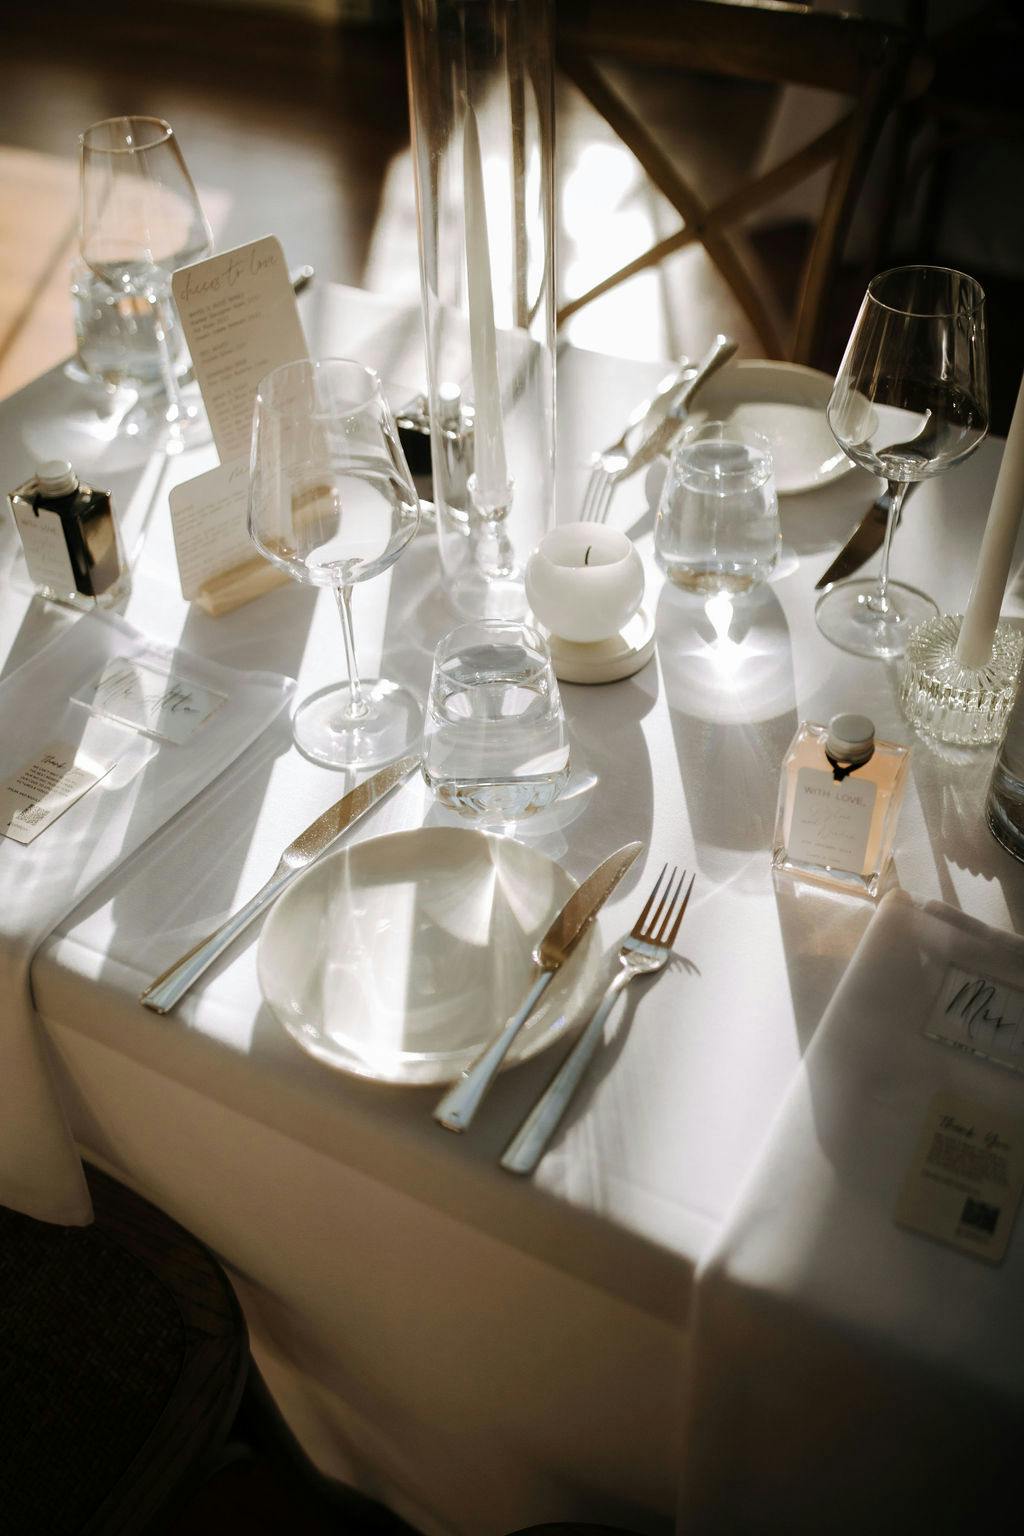 A beautifully set dining table with white linens, glassware, silverware, a candle, and menus. There are empty wine and water glasses, a small bottle of perfume, and a folded napkin on the table, illuminated by soft natural light.